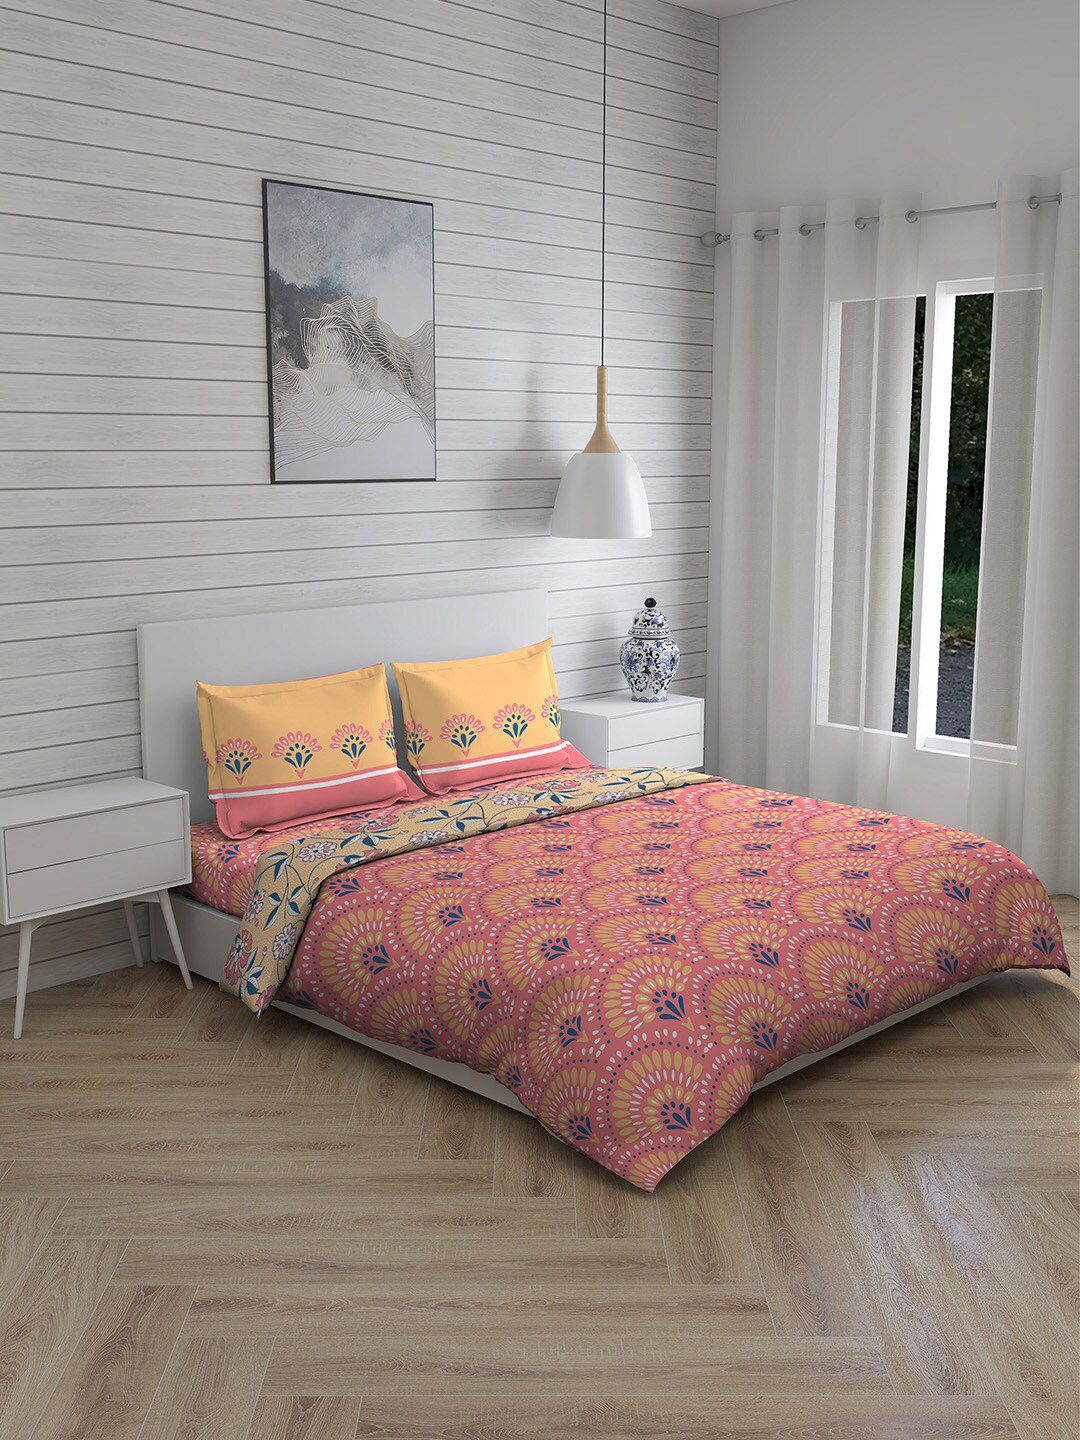 Boutique Living India Pink & Yellow Printed Cotton Double Queen Bedding Set With Comforter Price in India